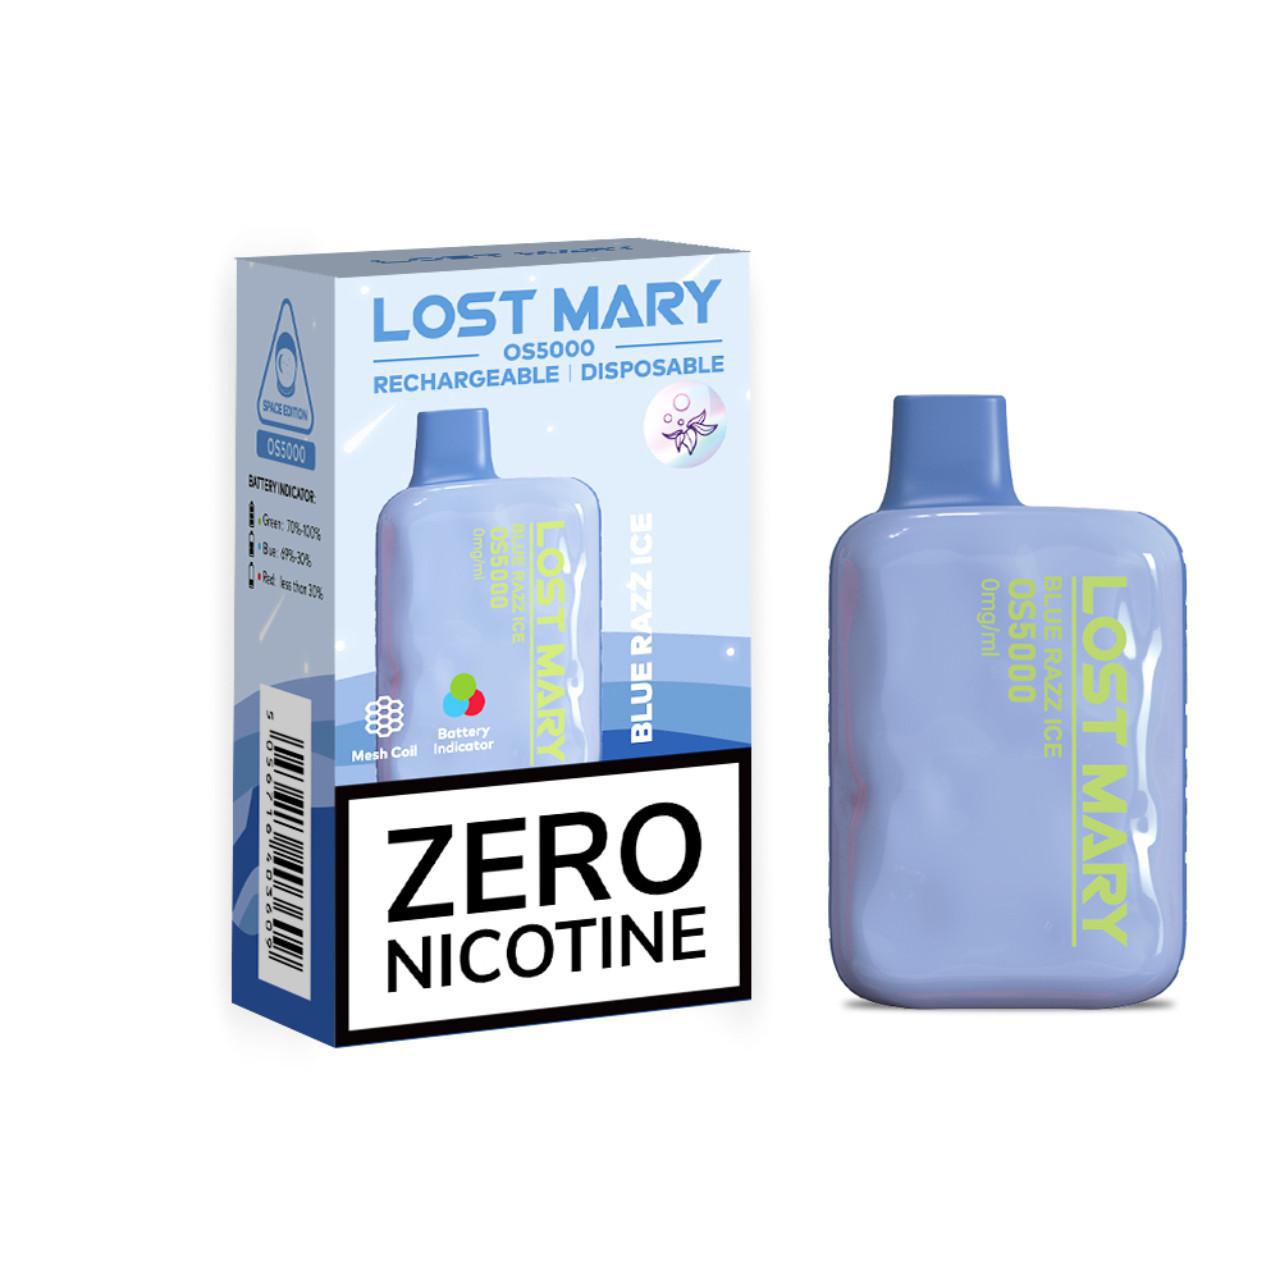 LOST MARY OS5000 0% -  Awesomevapestore